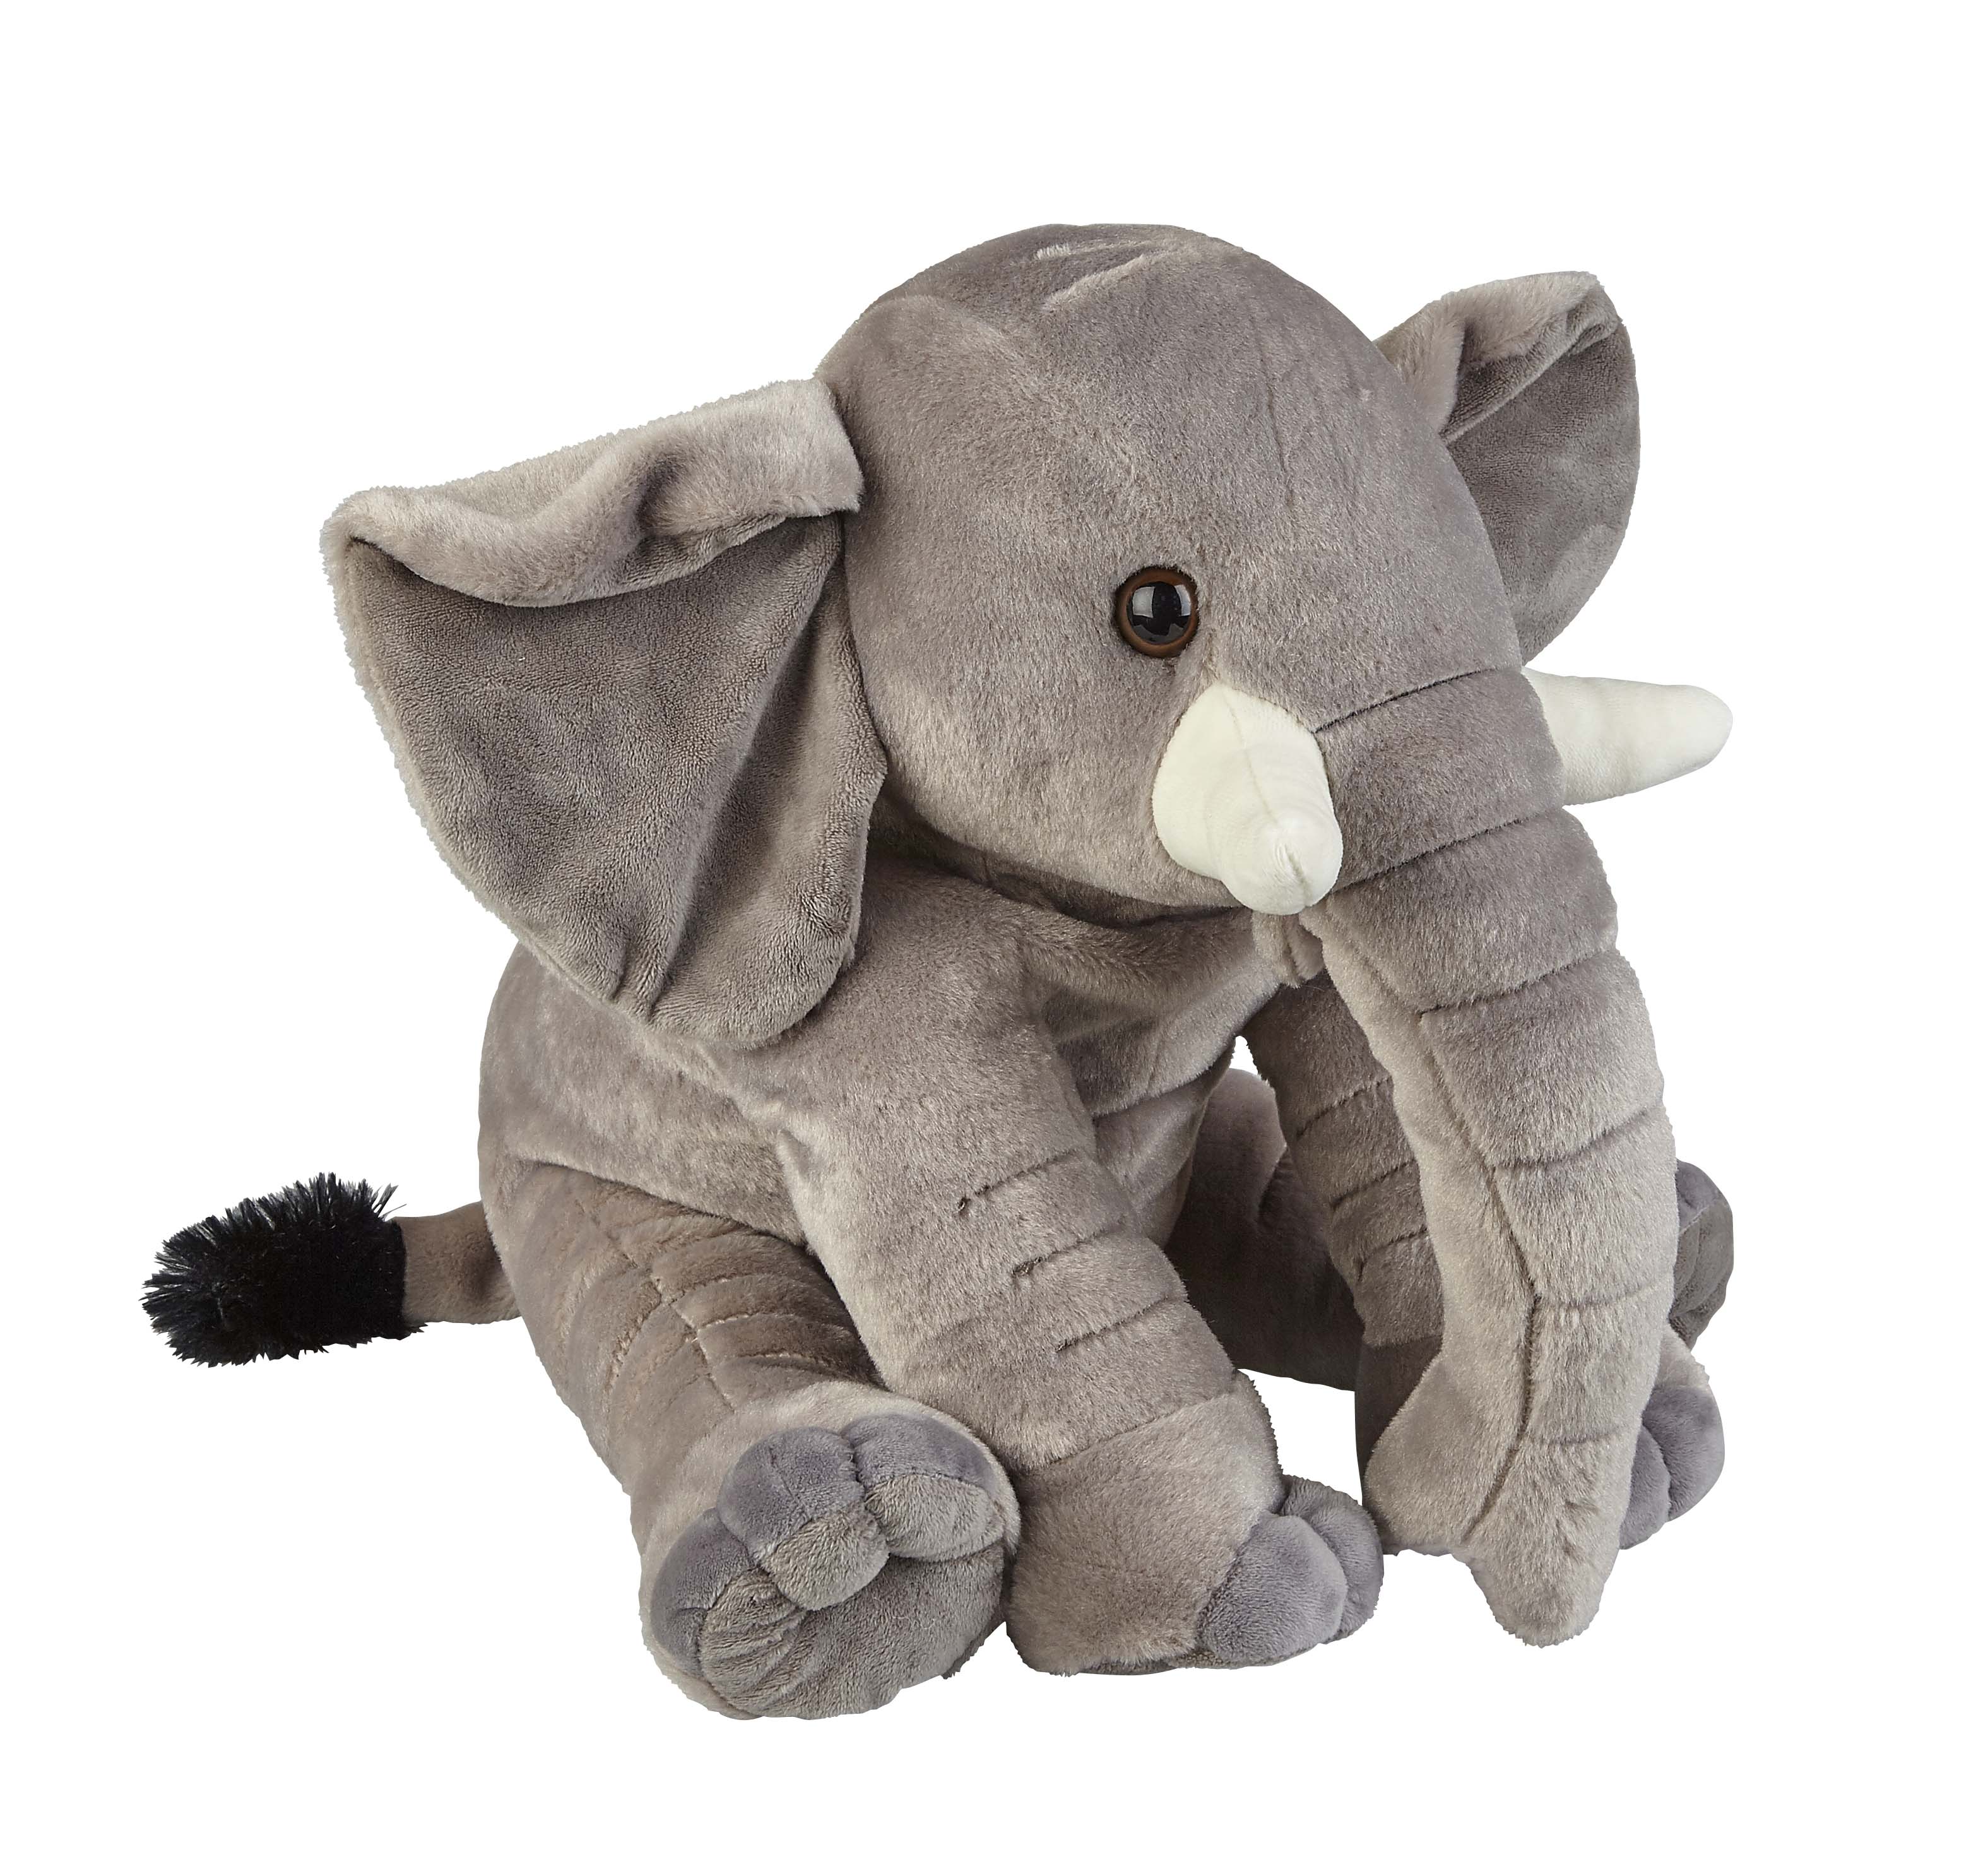 Toy Elephant For Museums